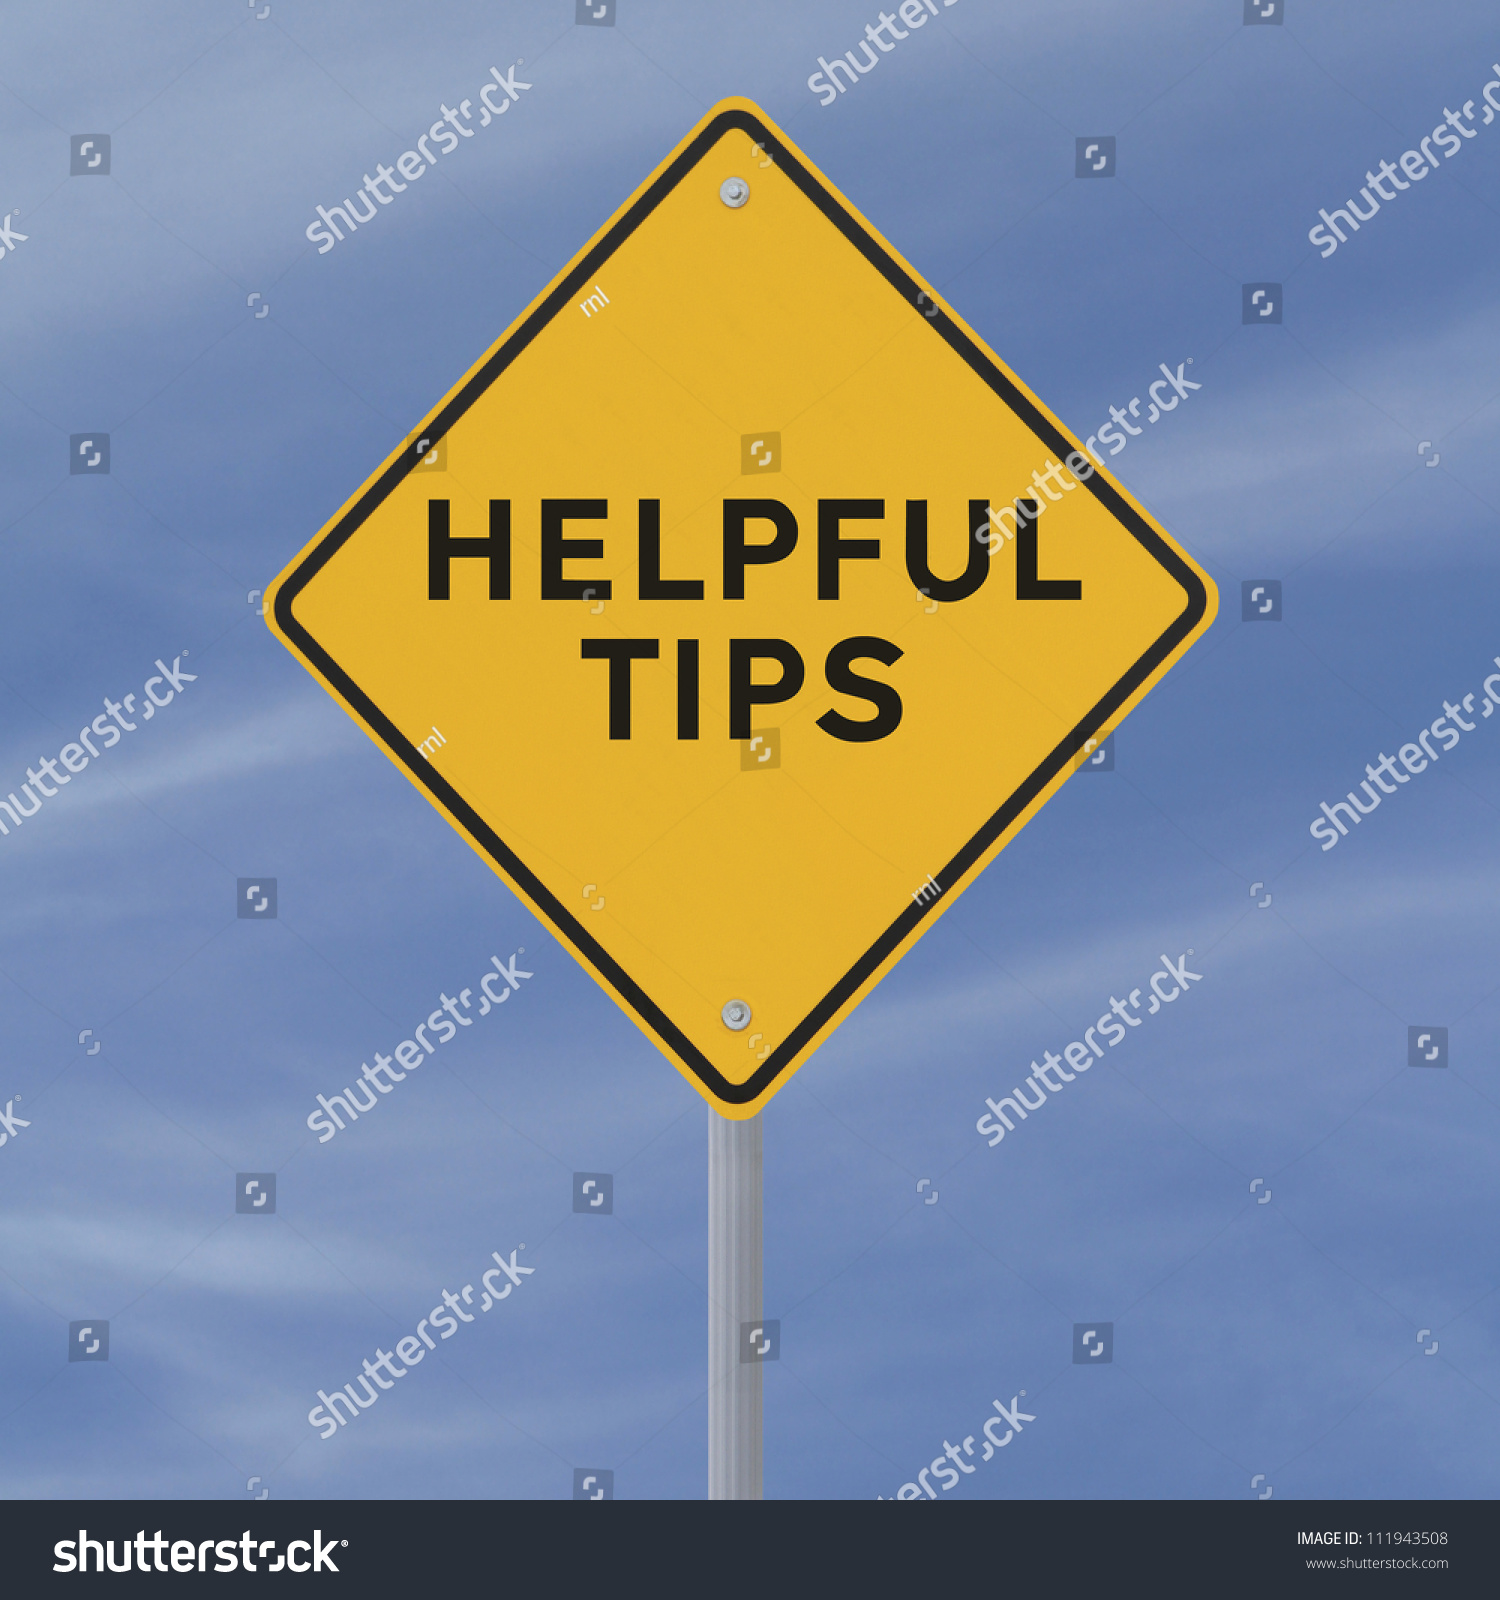 stock-photo-road-sign-indicating-helpful-tips-against-a-blue-sky-background-111943508.jpg